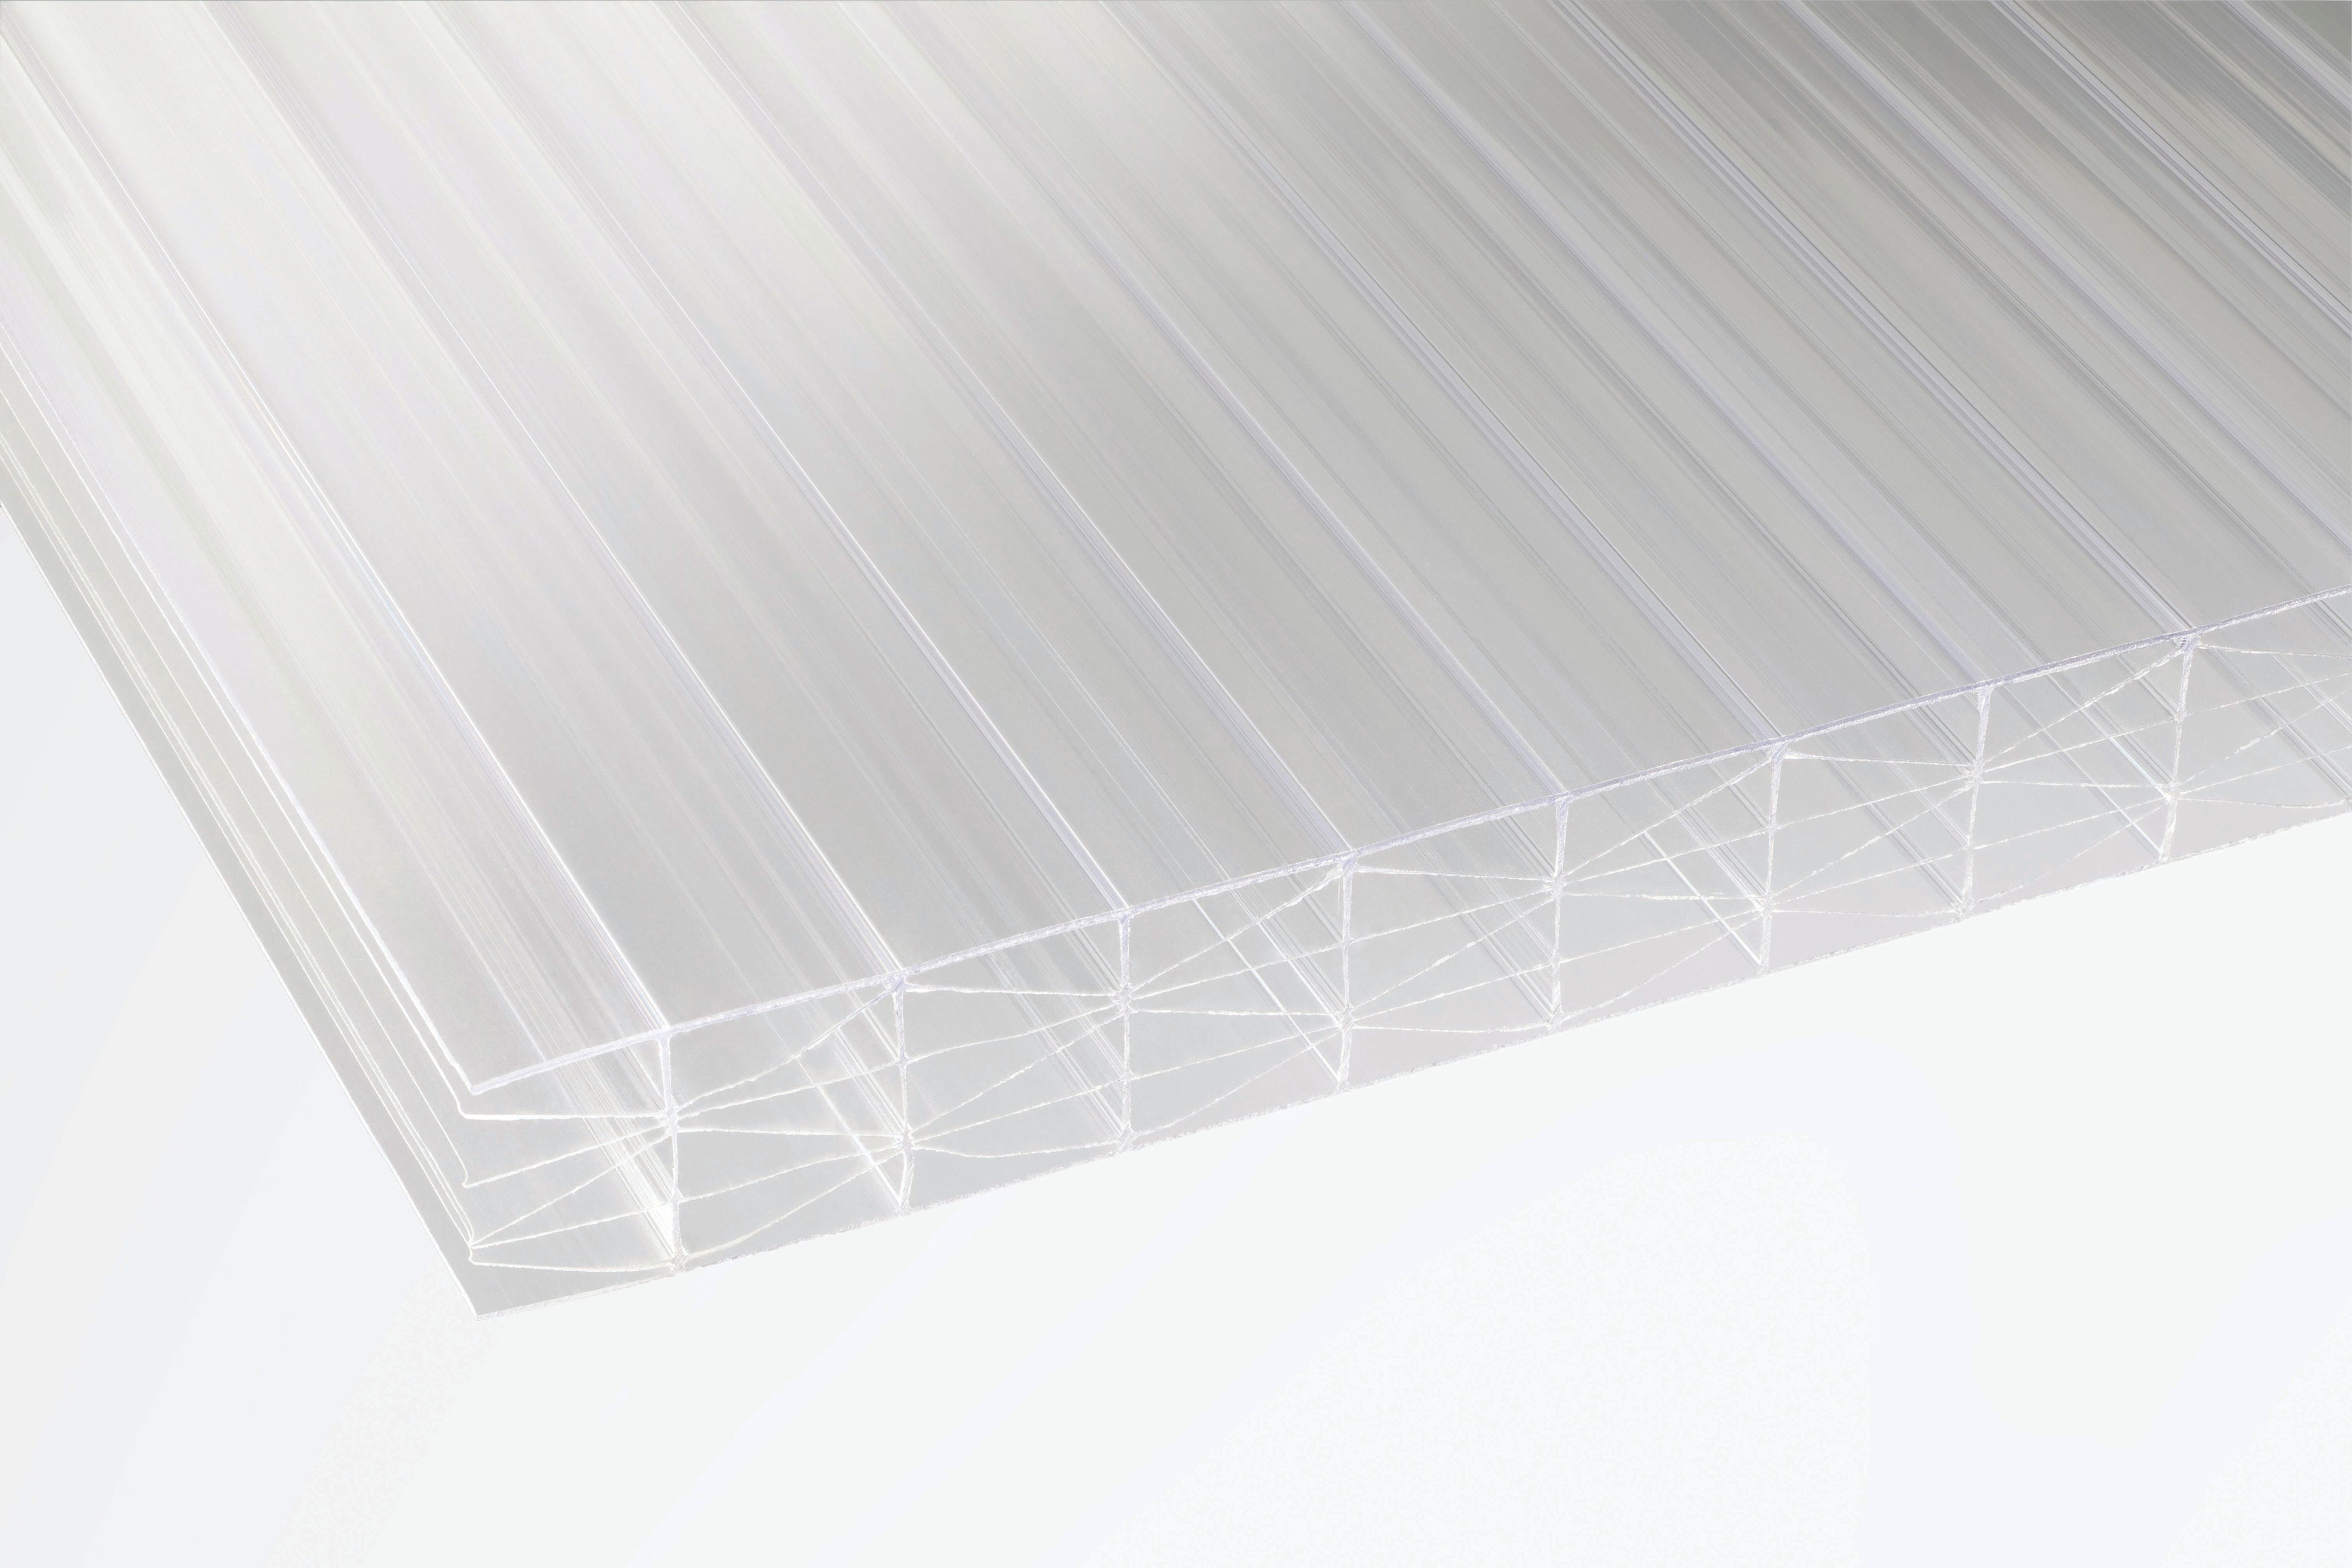 25mm Clear Multiwall Polycarbonate Sheet - 3000 x 700mm